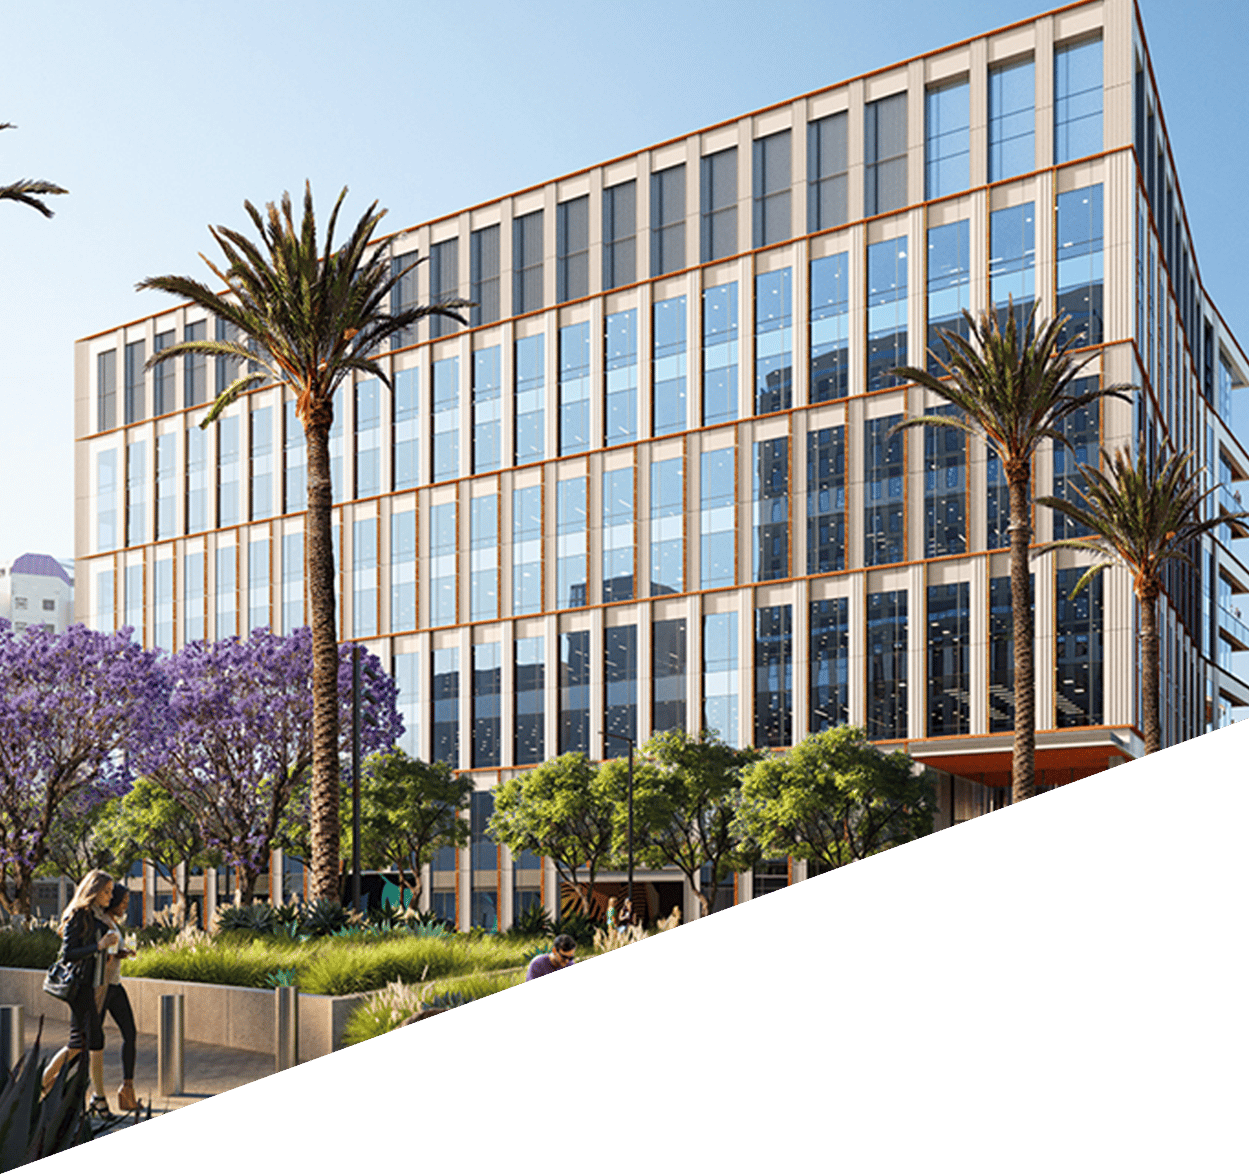 Modern, luxurious office building on a coastal campus surrounded by palm trees